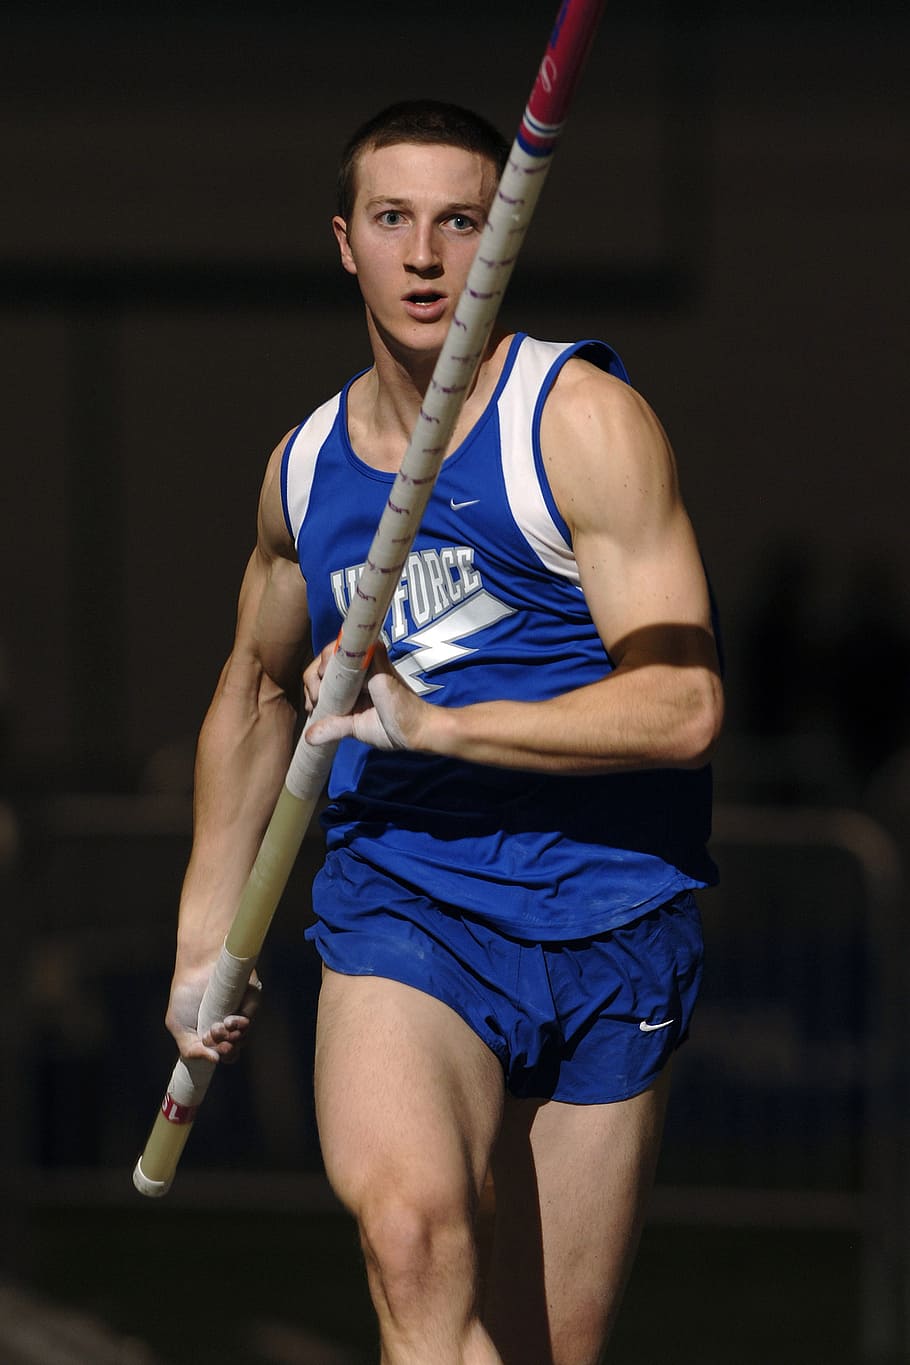 mark zuckerberg, pole vaulter, running, approach, athlete competition, jump, challenge, male, event, performance